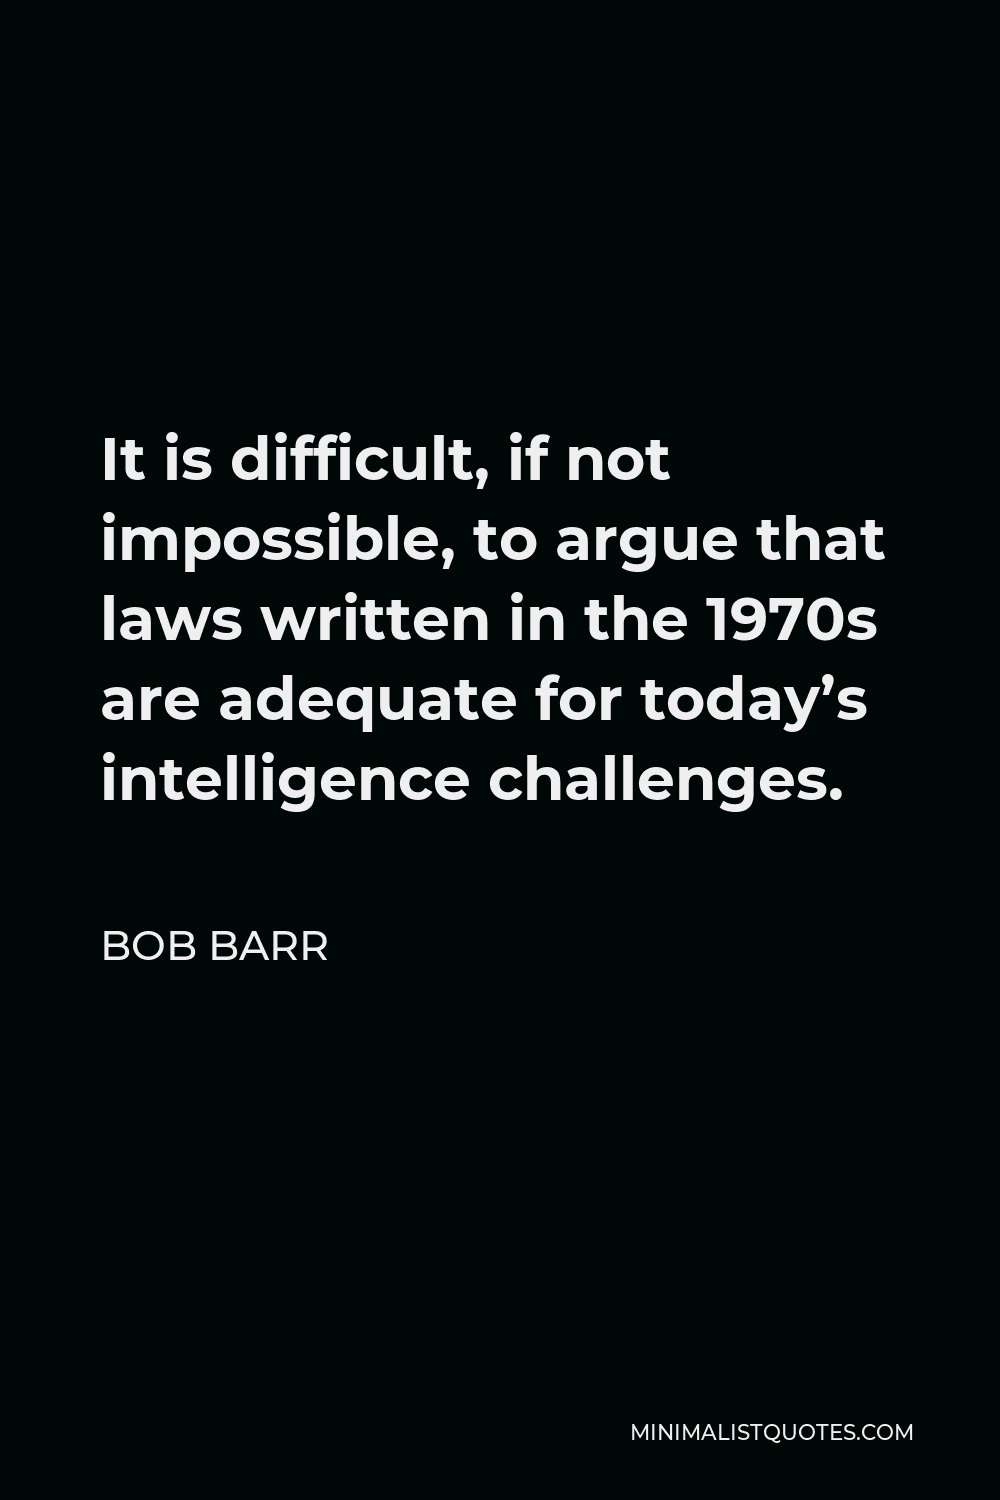 Bob Barr Quote - It is difficult, if not impossible, to argue that laws written in the 1970s are adequate for today’s intelligence challenges.